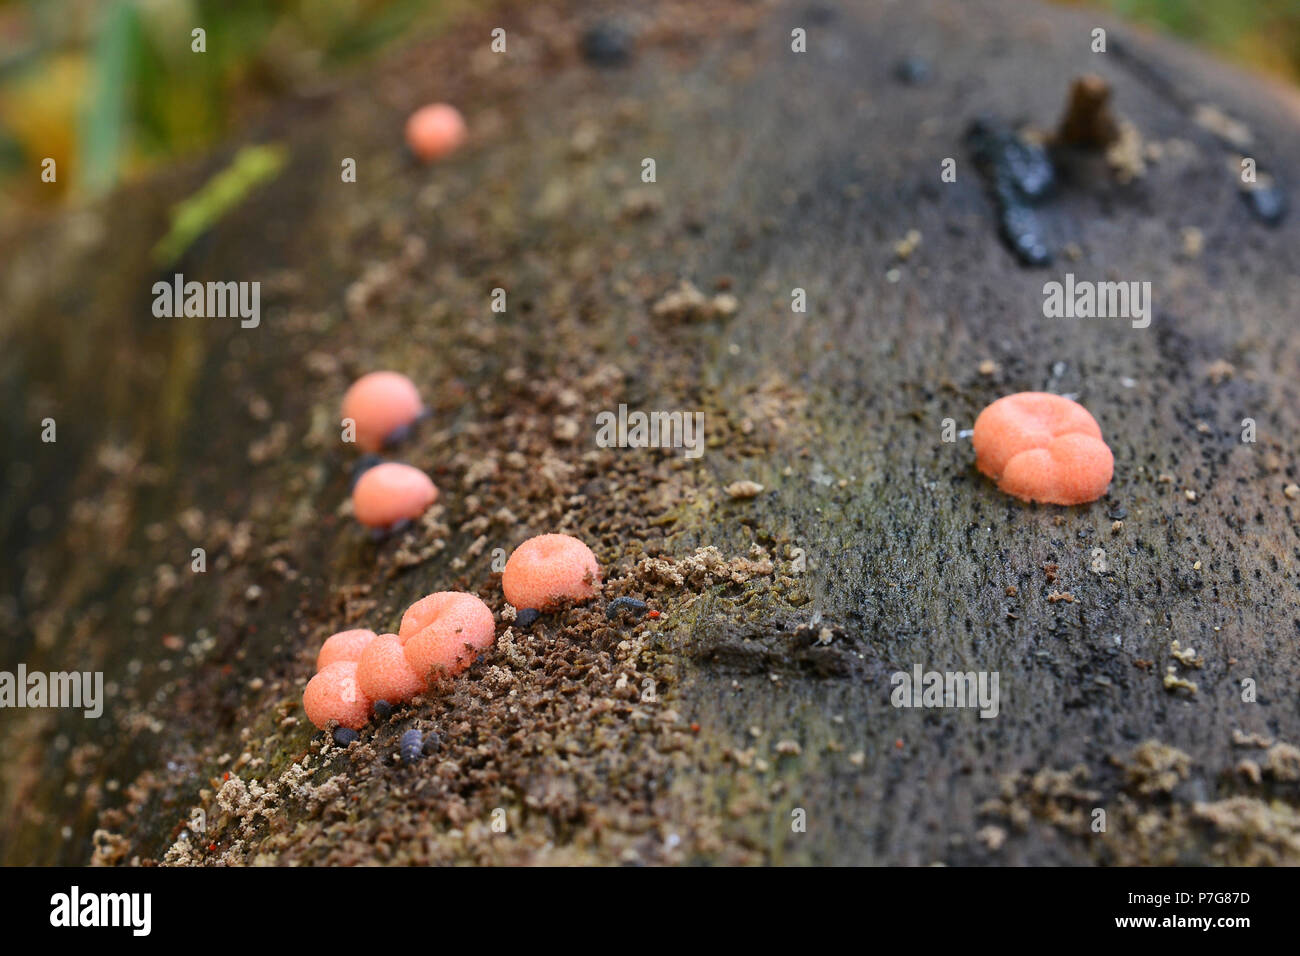 lycogala epidendrum slime mold on a tree trunk Stock Photo